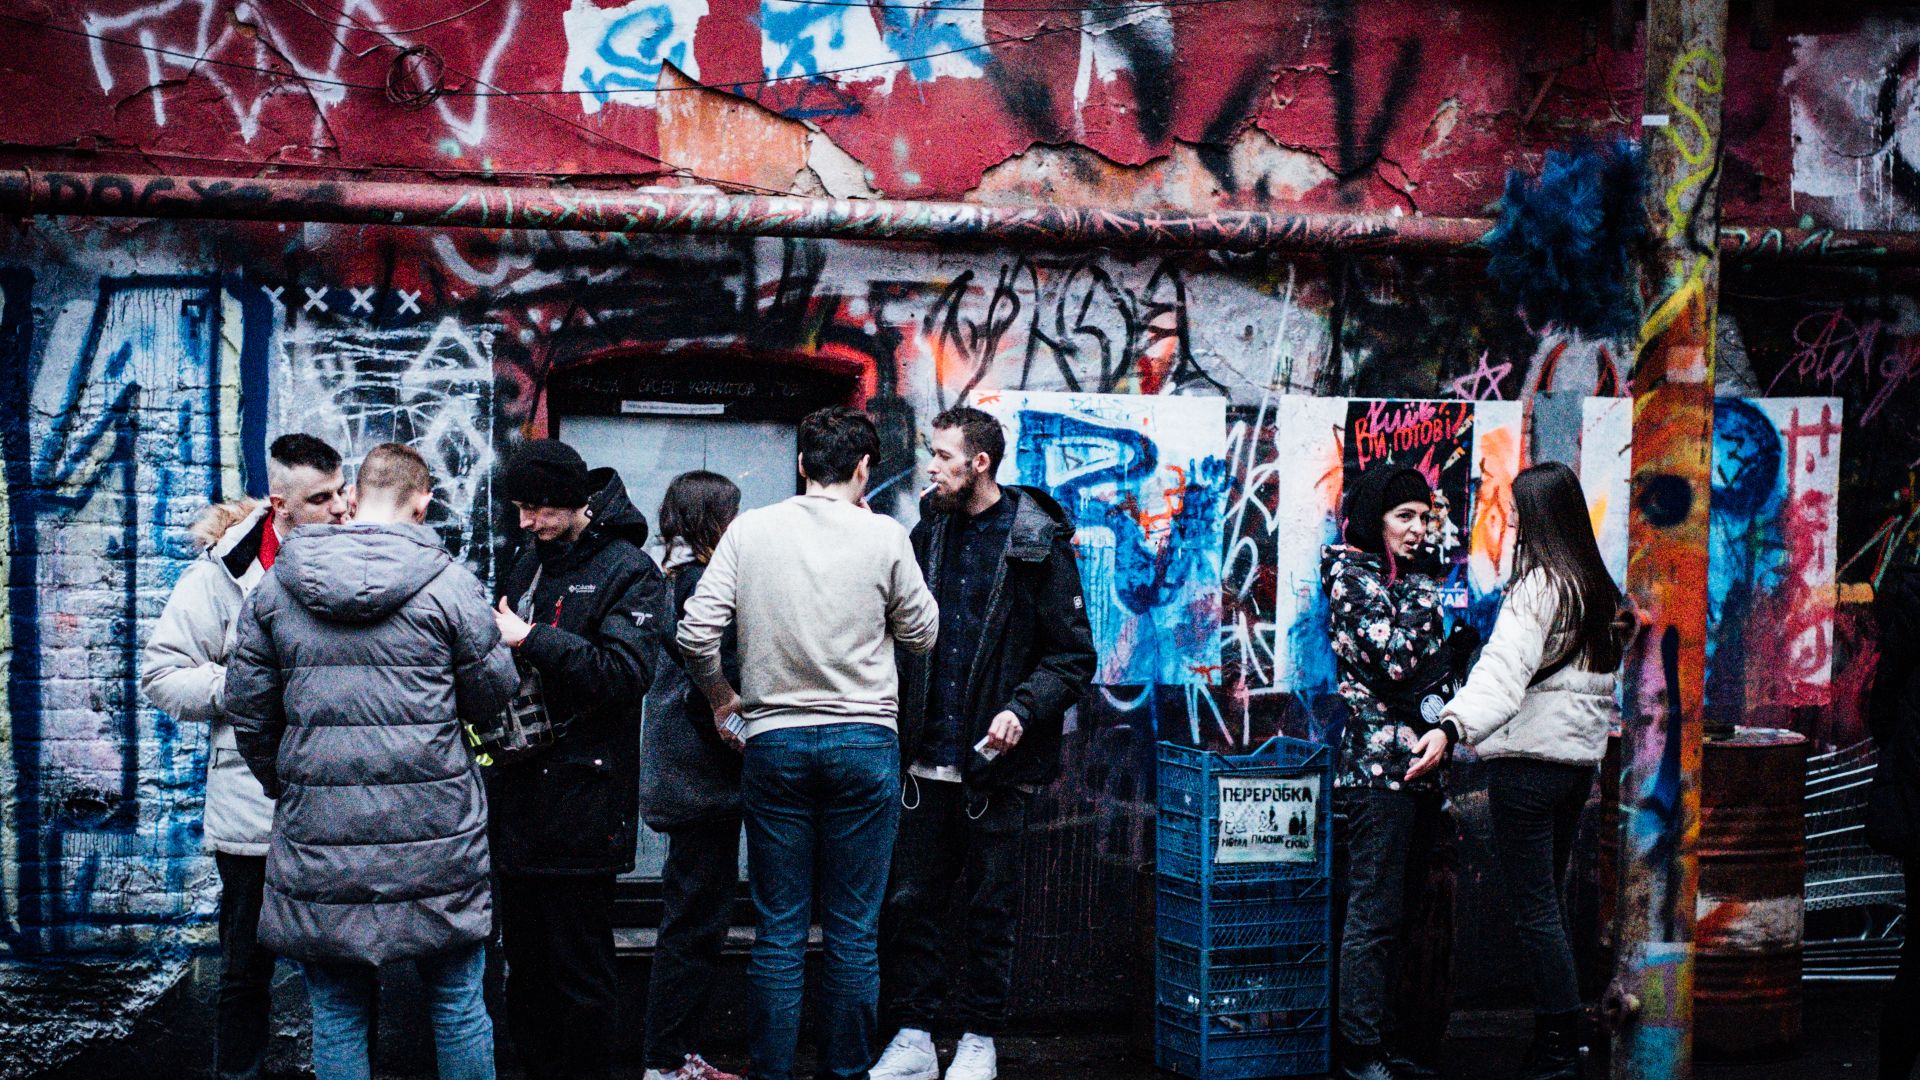 A photo of people standing outside, in front of a wall filled with graffiti.